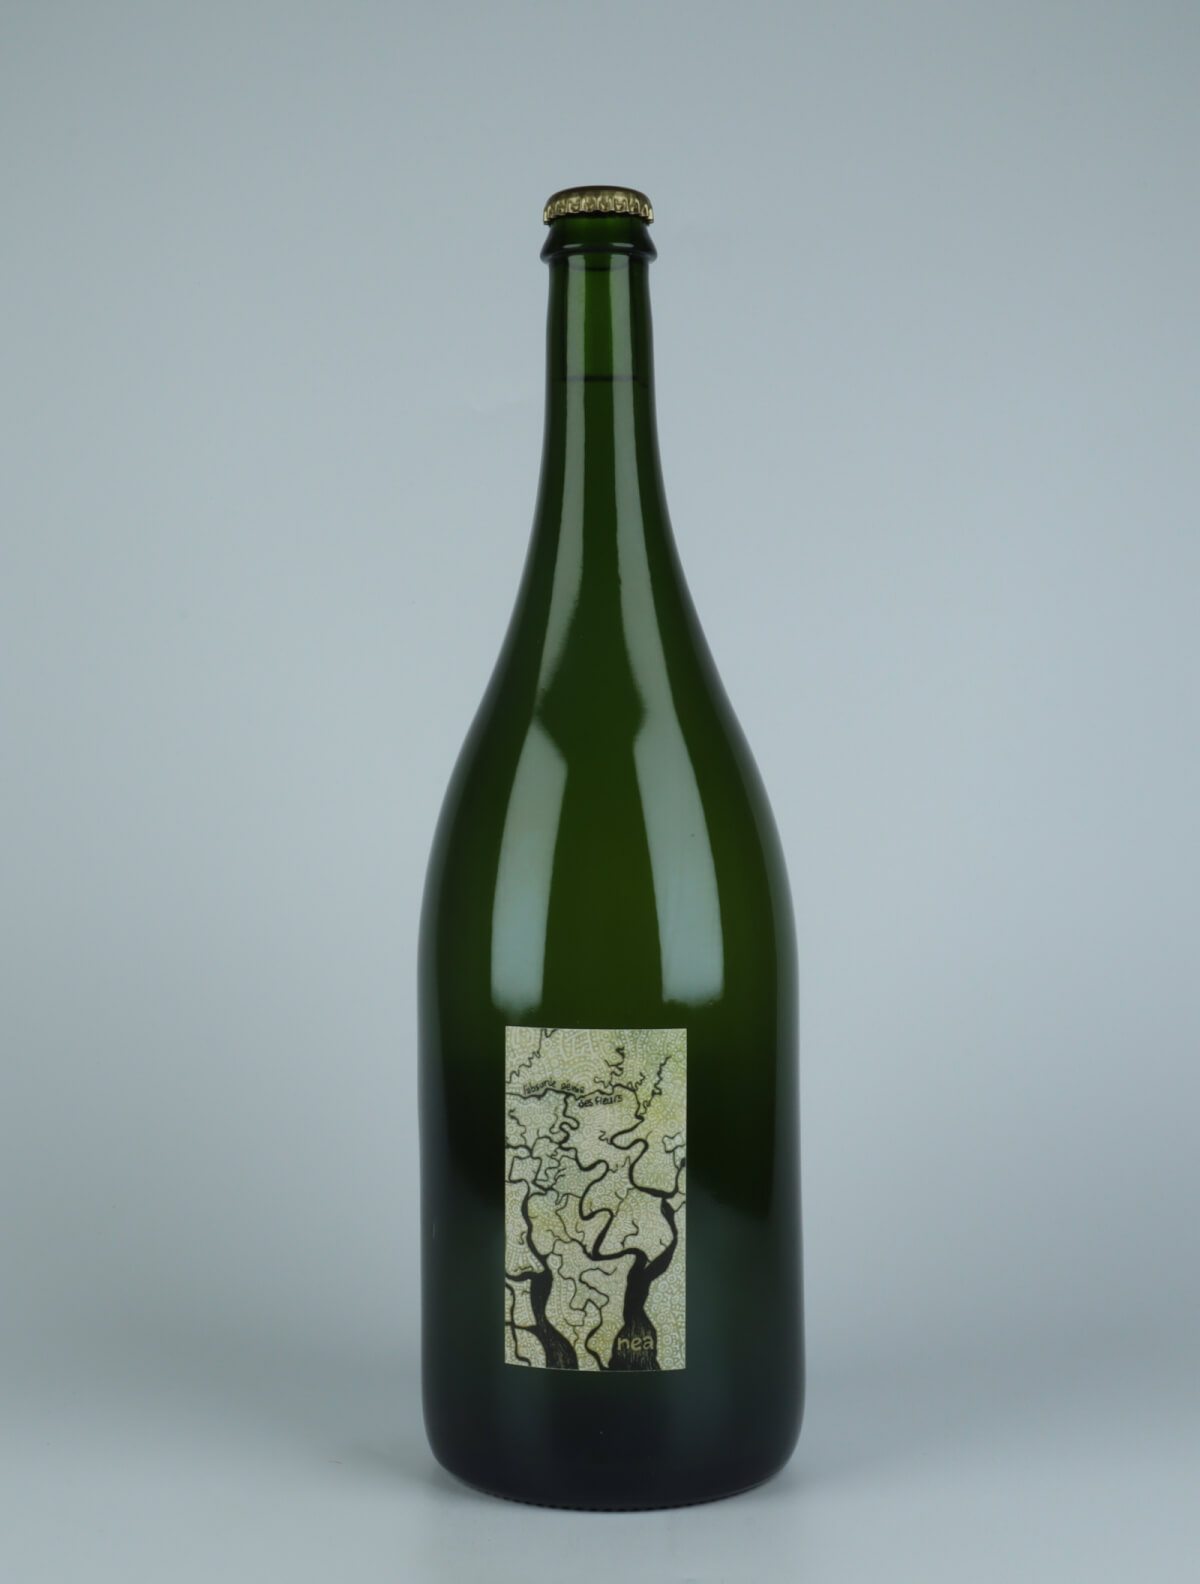 A bottle 2021 Nea White wine from Absurde Génie des Fleurs, Languedoc in France